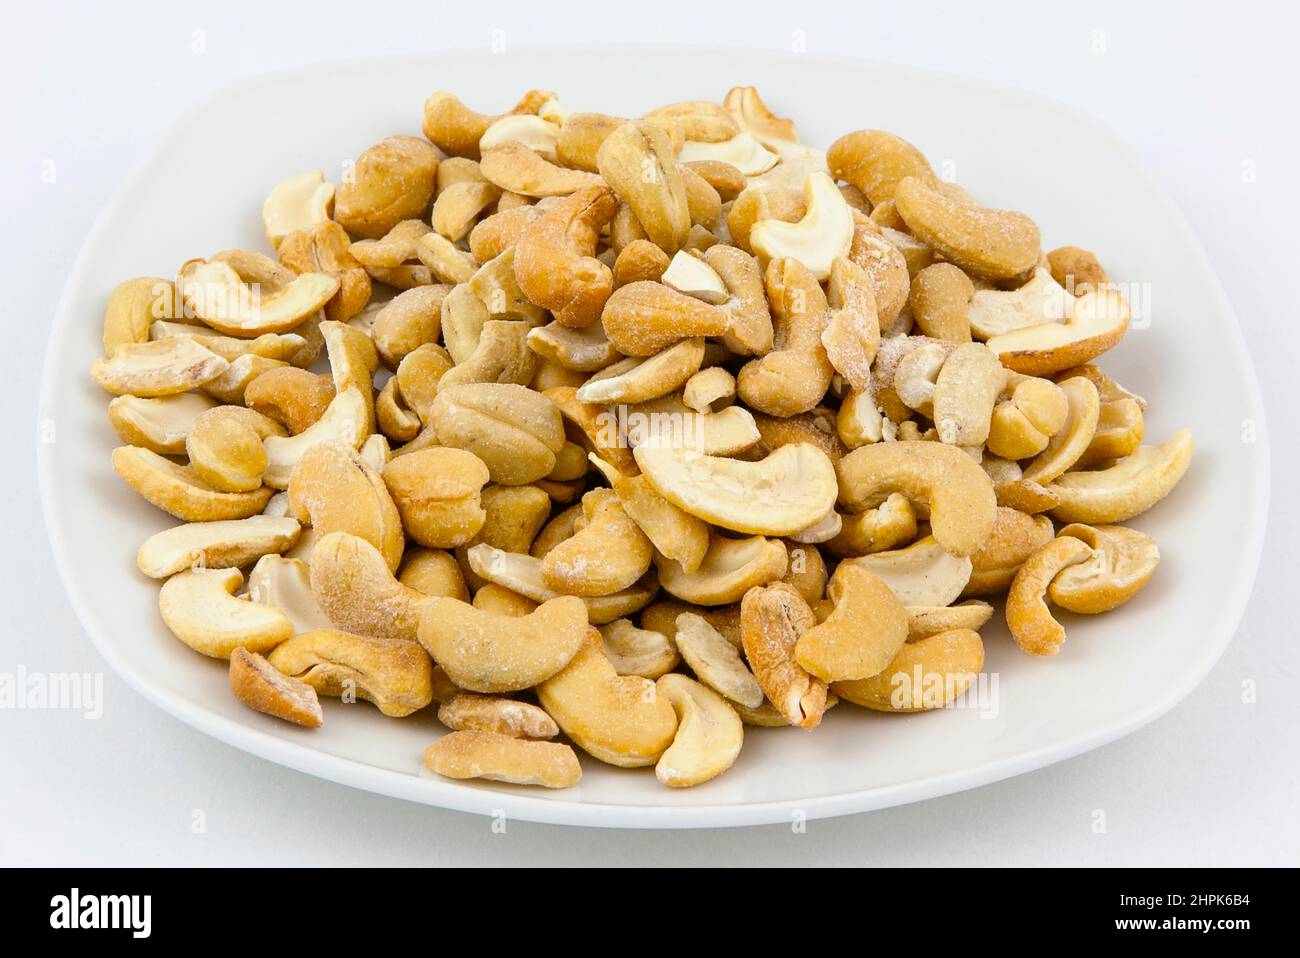 Food, Snacks, Roasted and salted Cashew nuts. Stock Photo